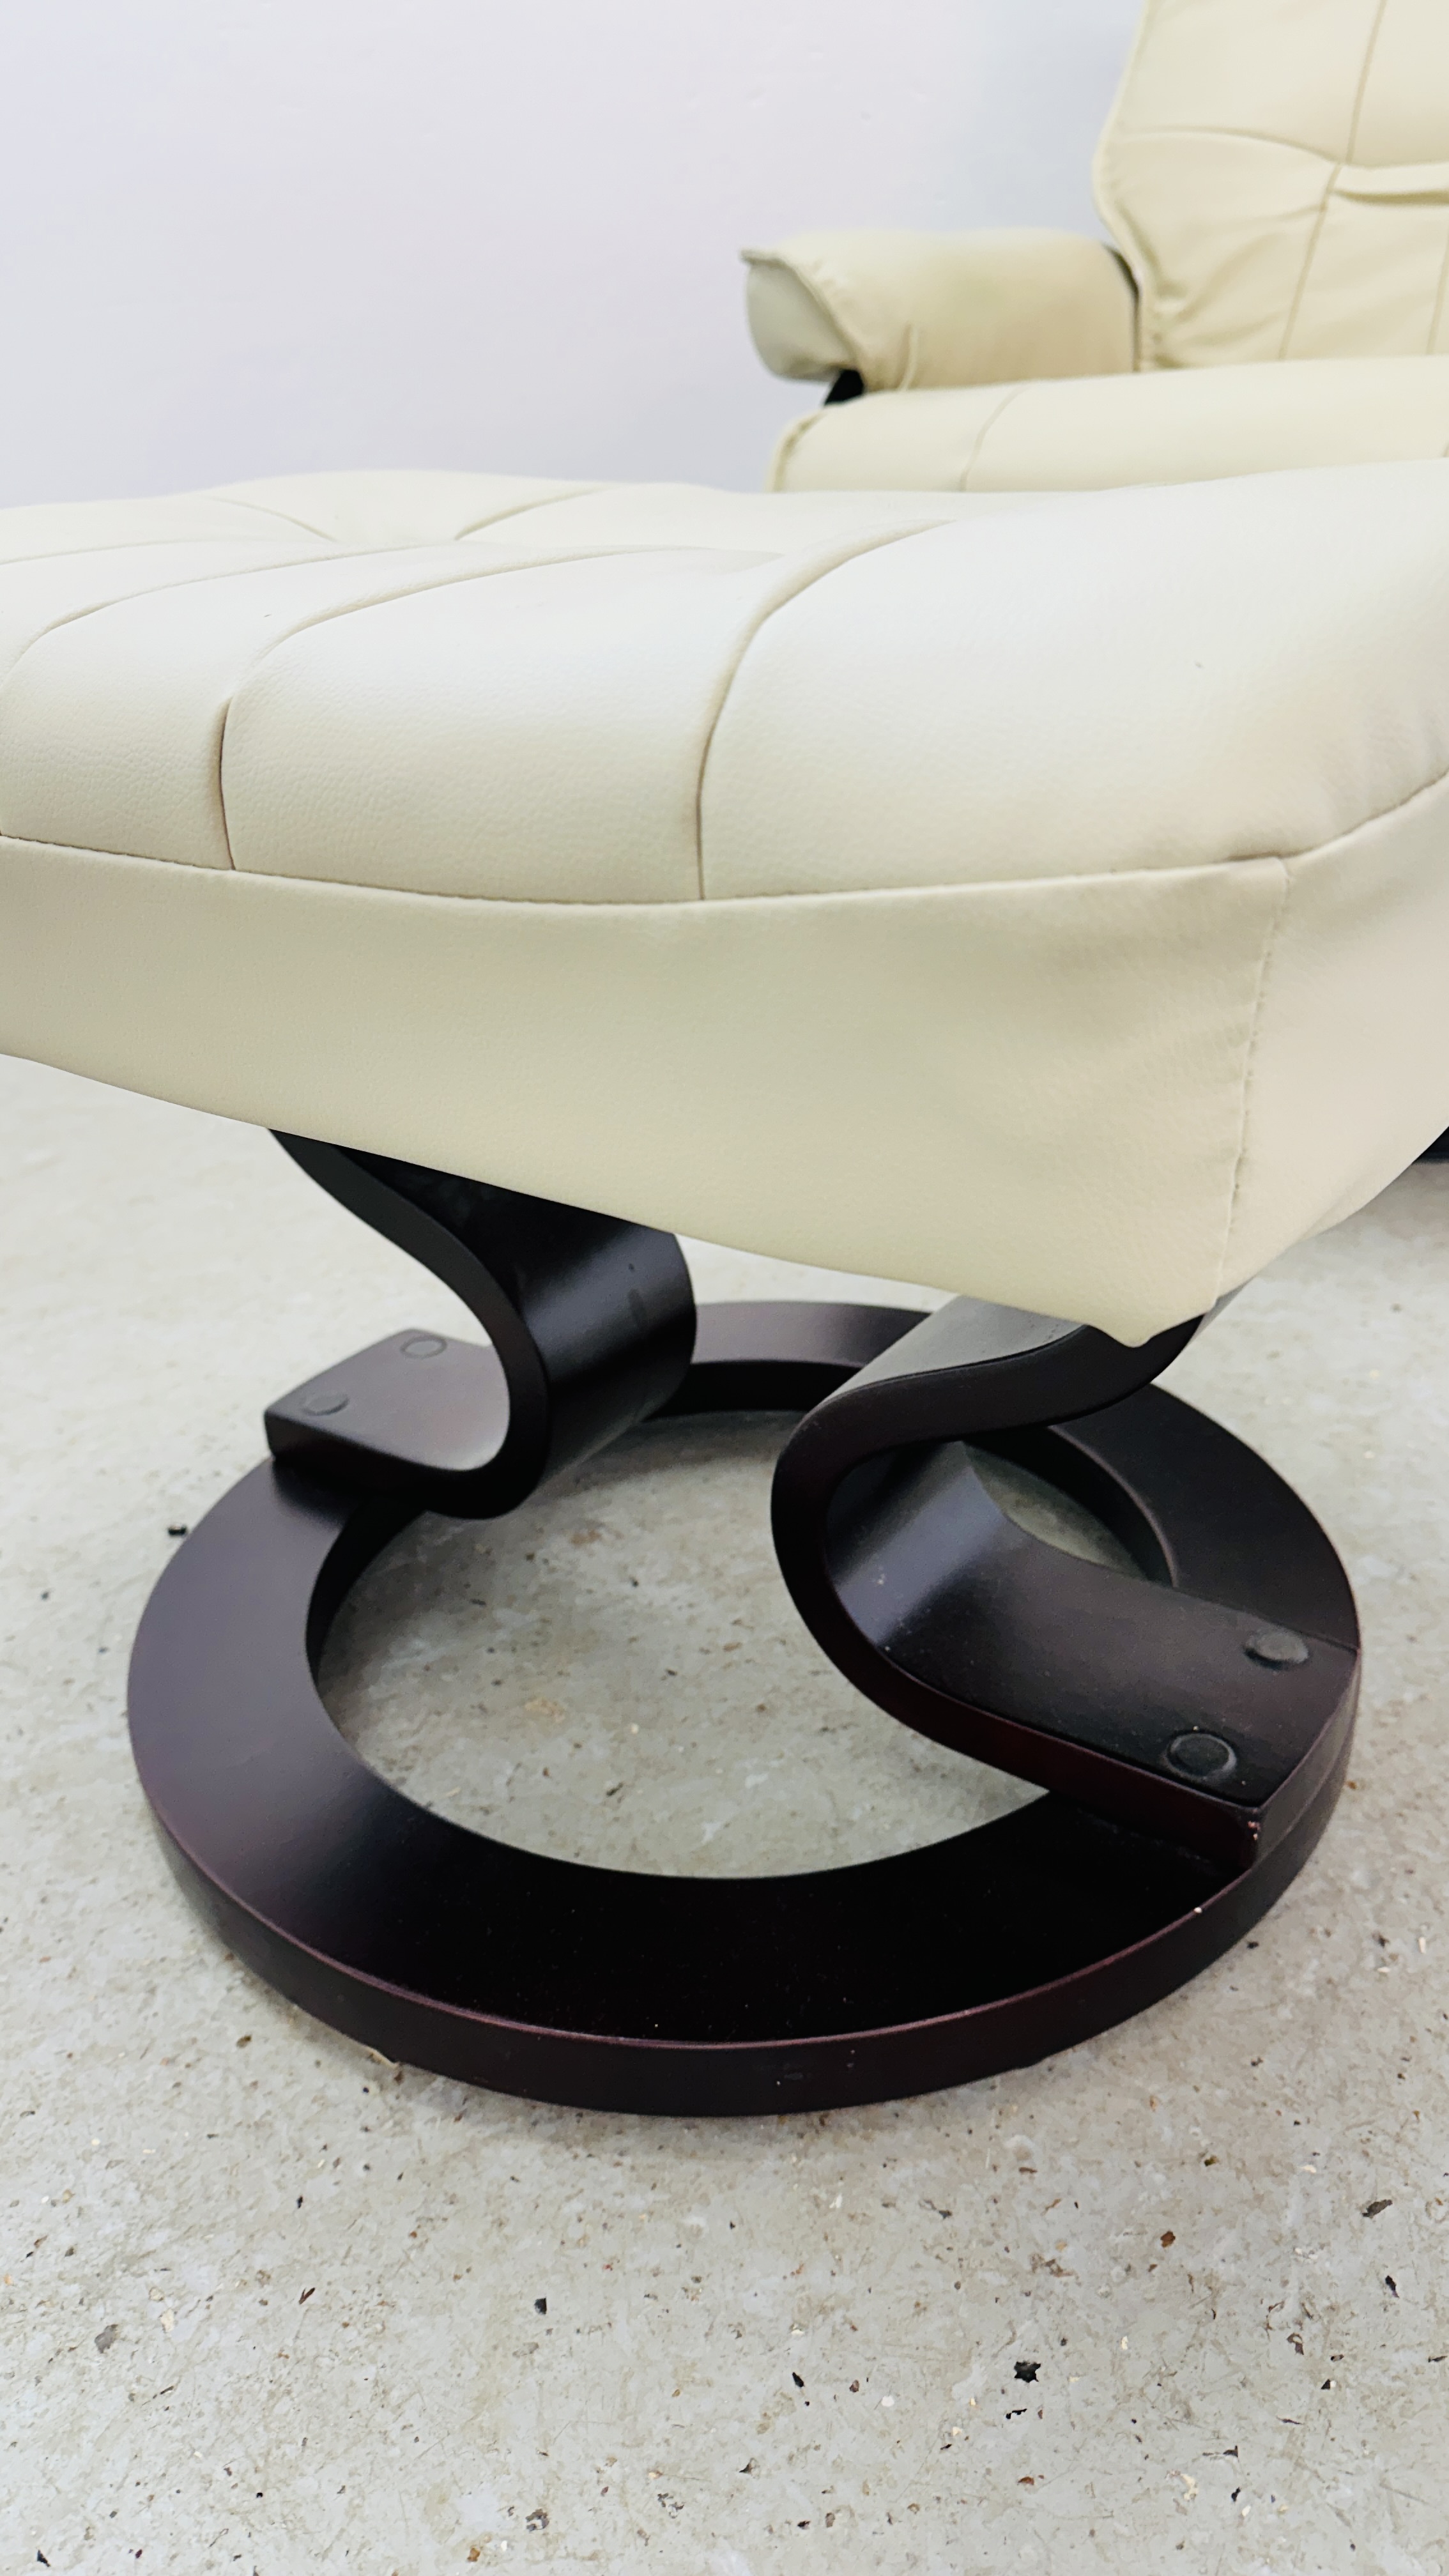 A MODERN CREAM FAUX LEATHER RECLINING RELAXER CHAIR AND FOOTSTOOL. - Image 12 of 12